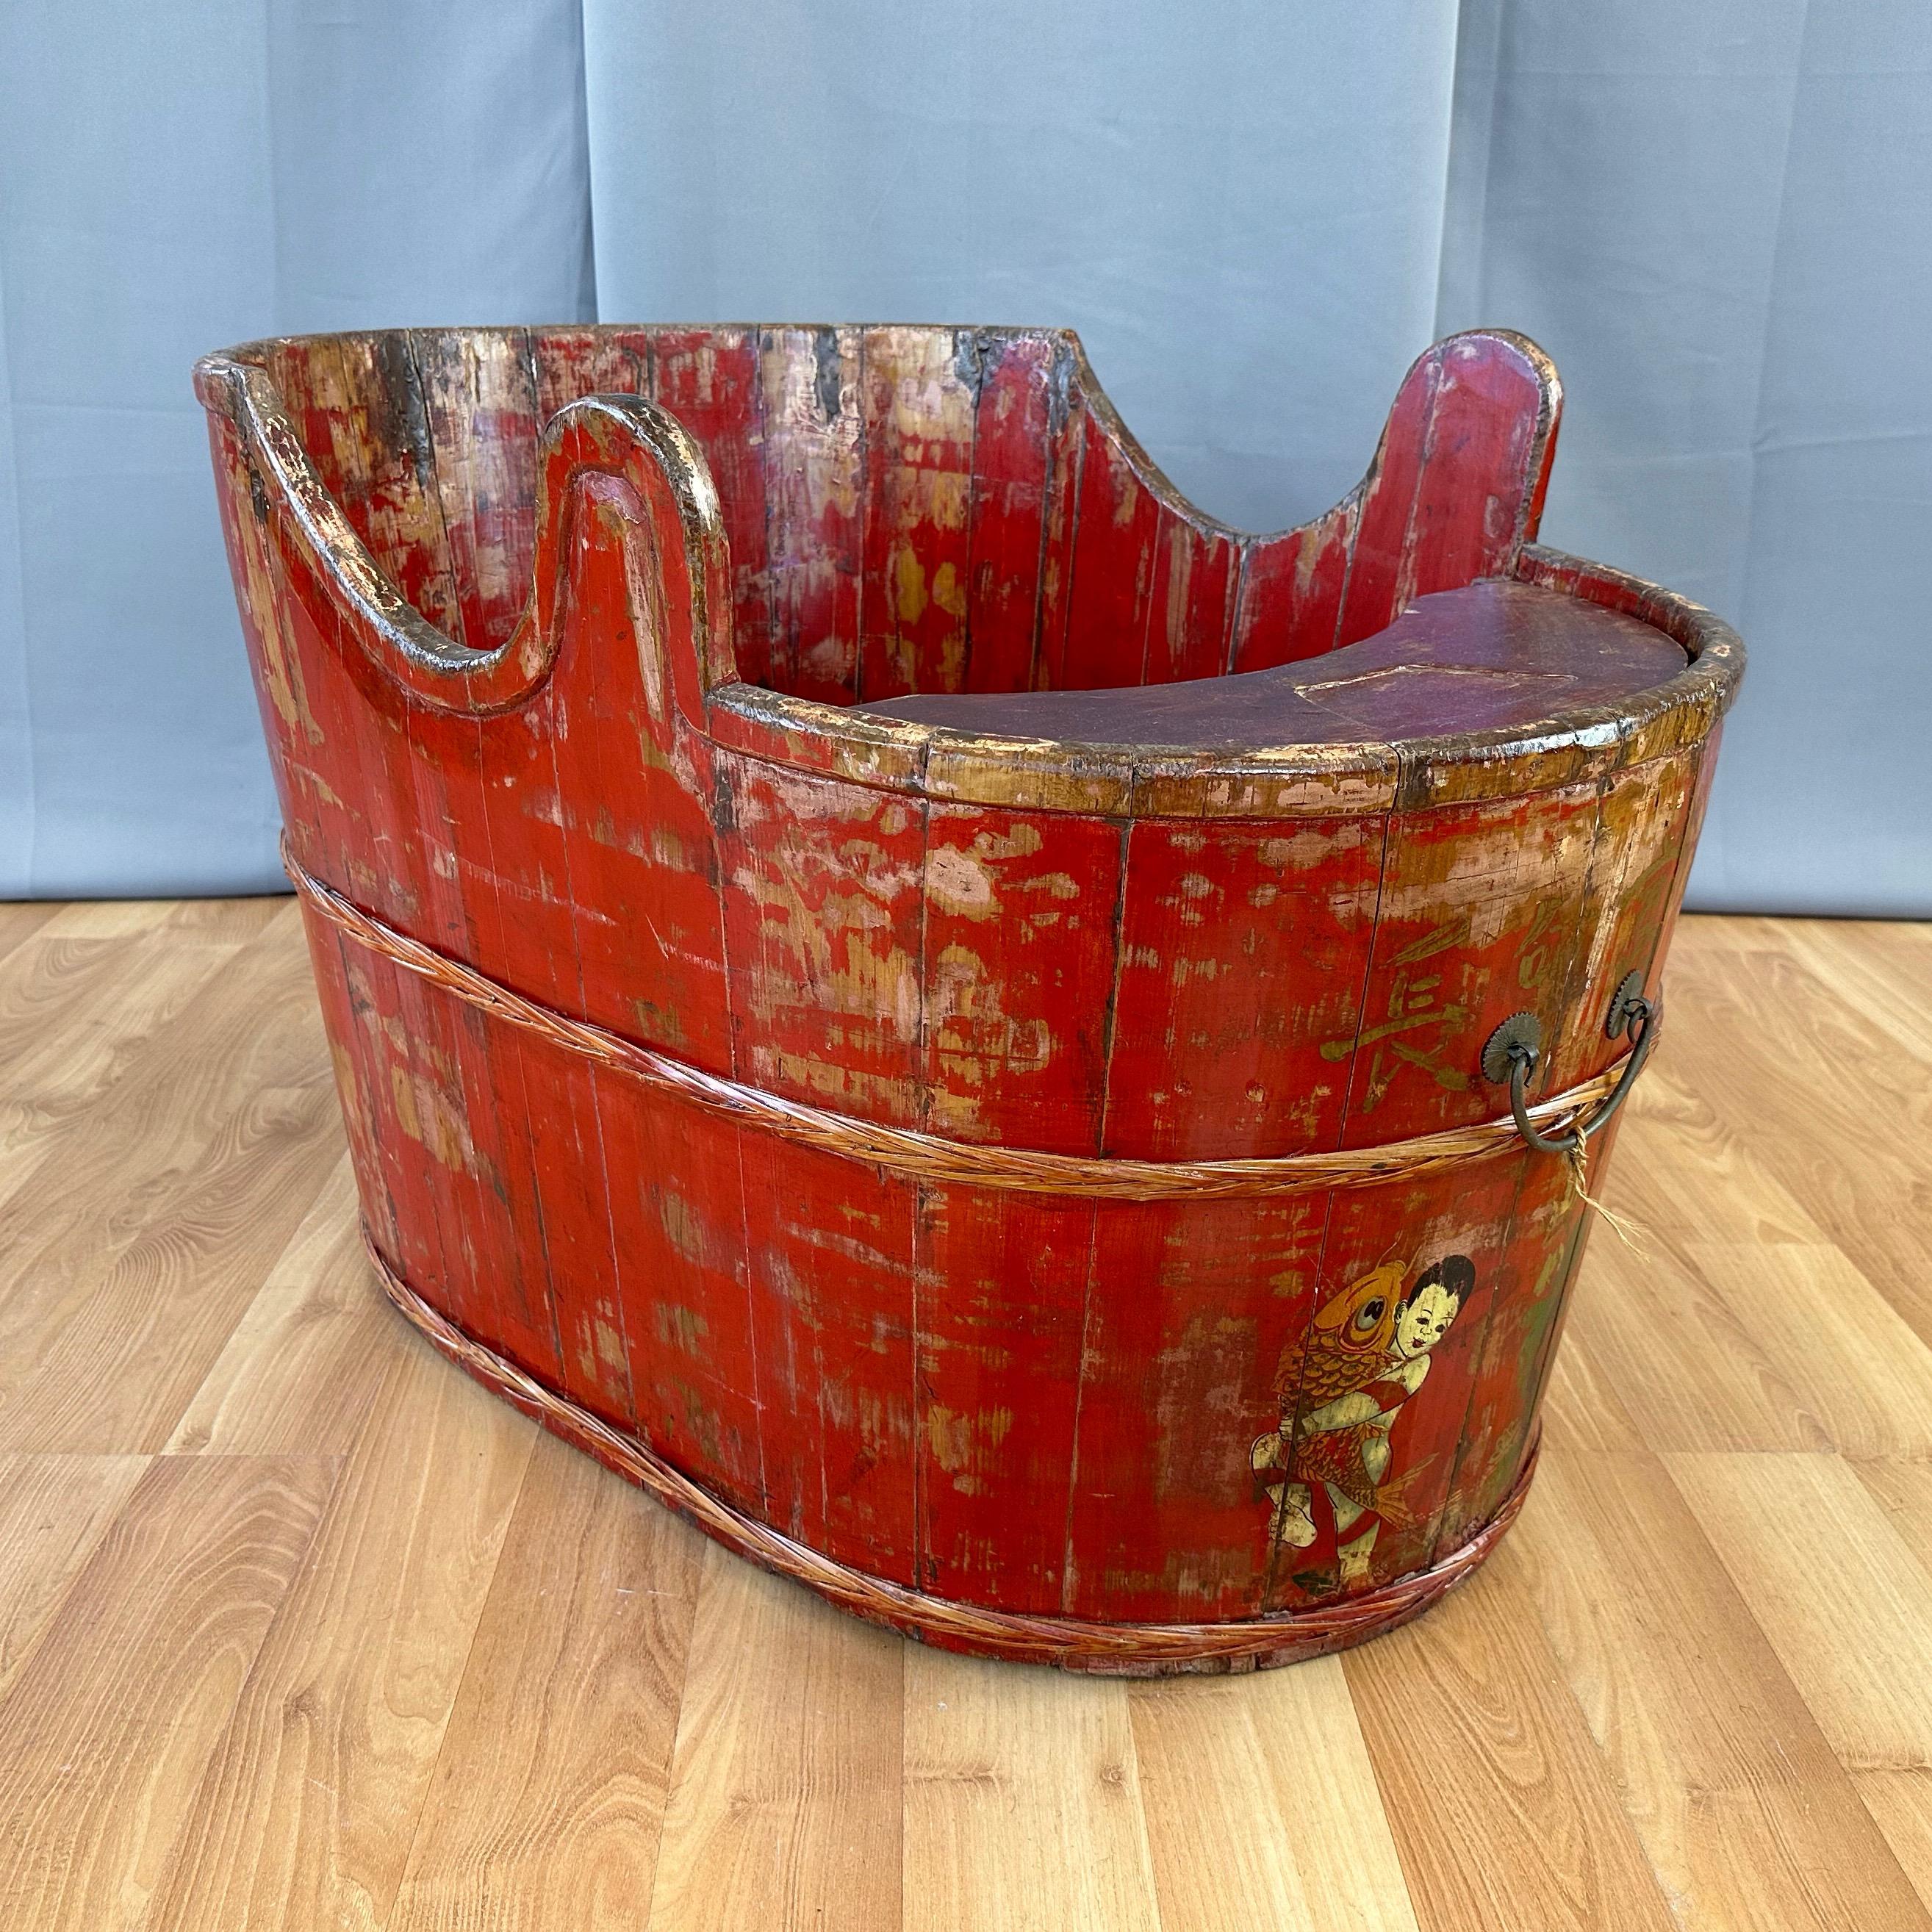 A delightful circa 1900 Qing era Chinese red lacquered wood child’s convertible combination bathtub and seat.

Oval staved wood plank body finished in brilliant red lacquer and a clear coat. With a higher back then front, and horn-like elements on